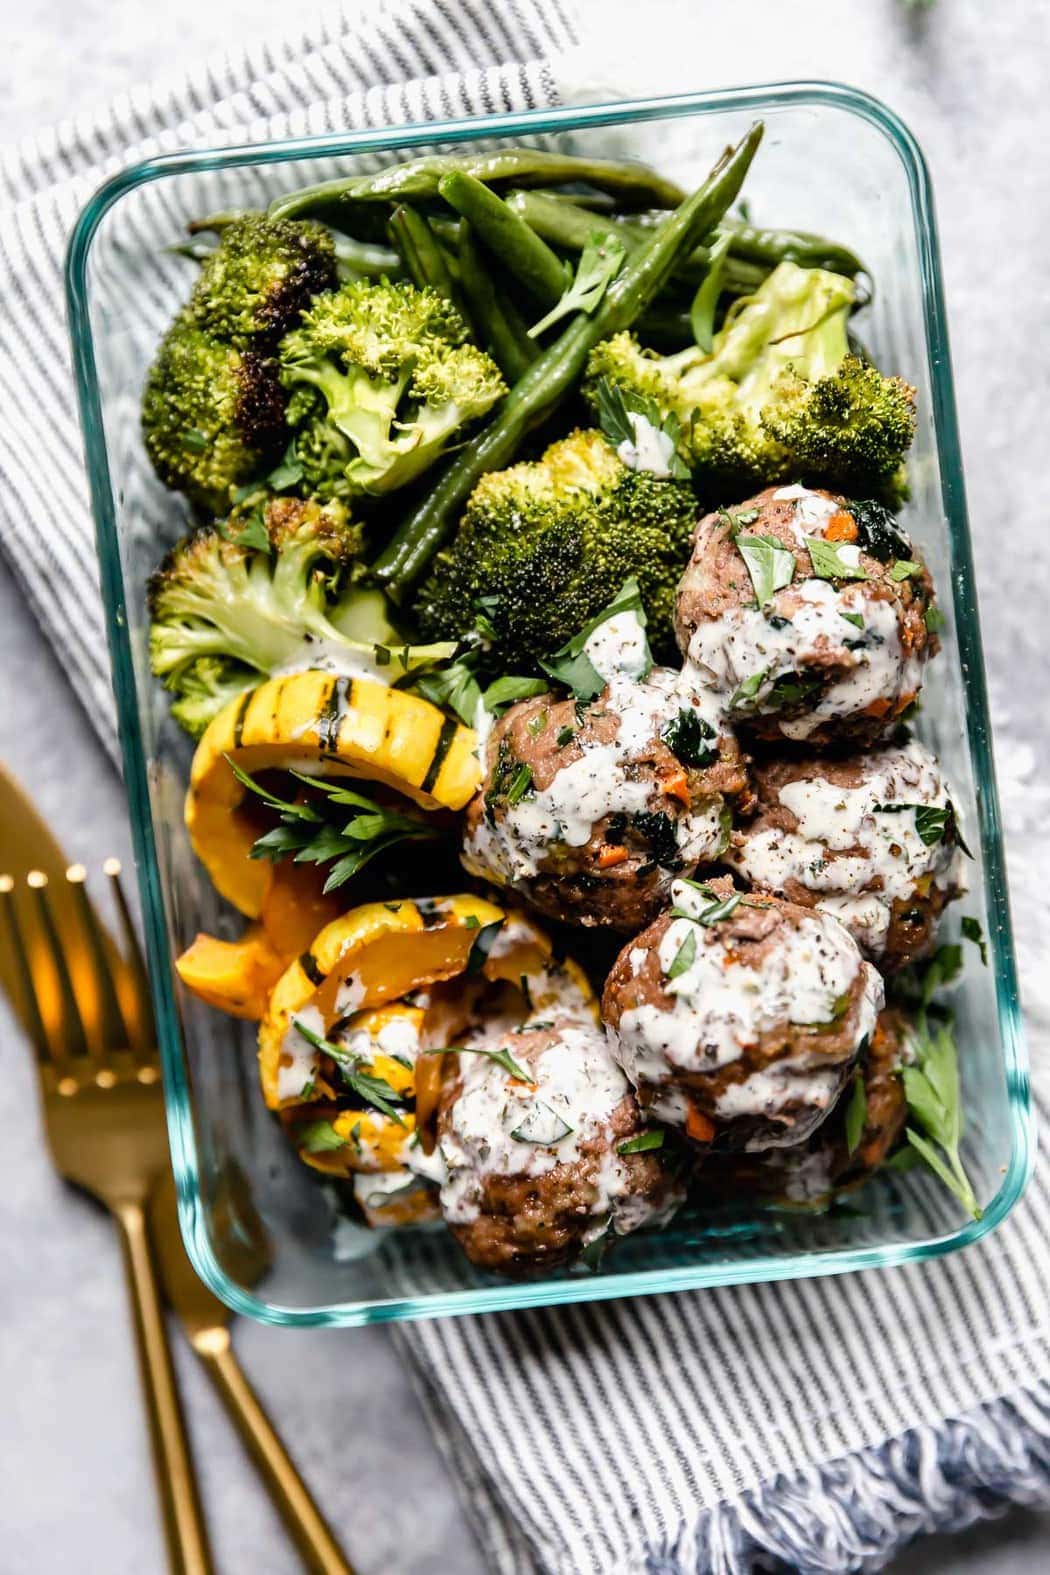 https://therealfooddietitians.com/wp-content/uploads/2019/12/Ultimate-Meal-Prep-Meatballs-10-1.jpg